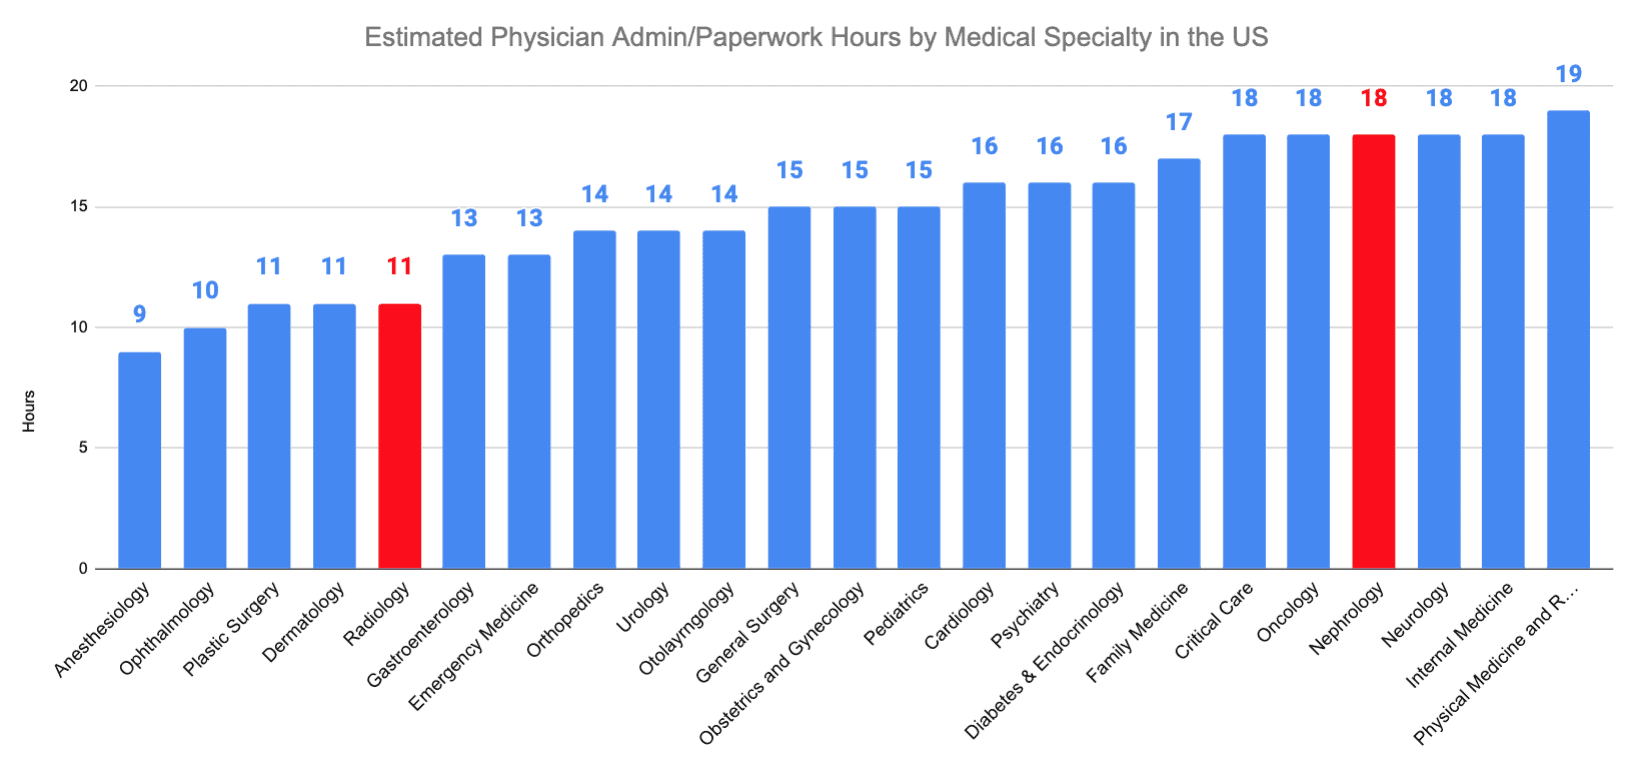 Radiology vs. Nephrology Estimated Physician Admin/Paperwork Hours by Medical Specialty in the US